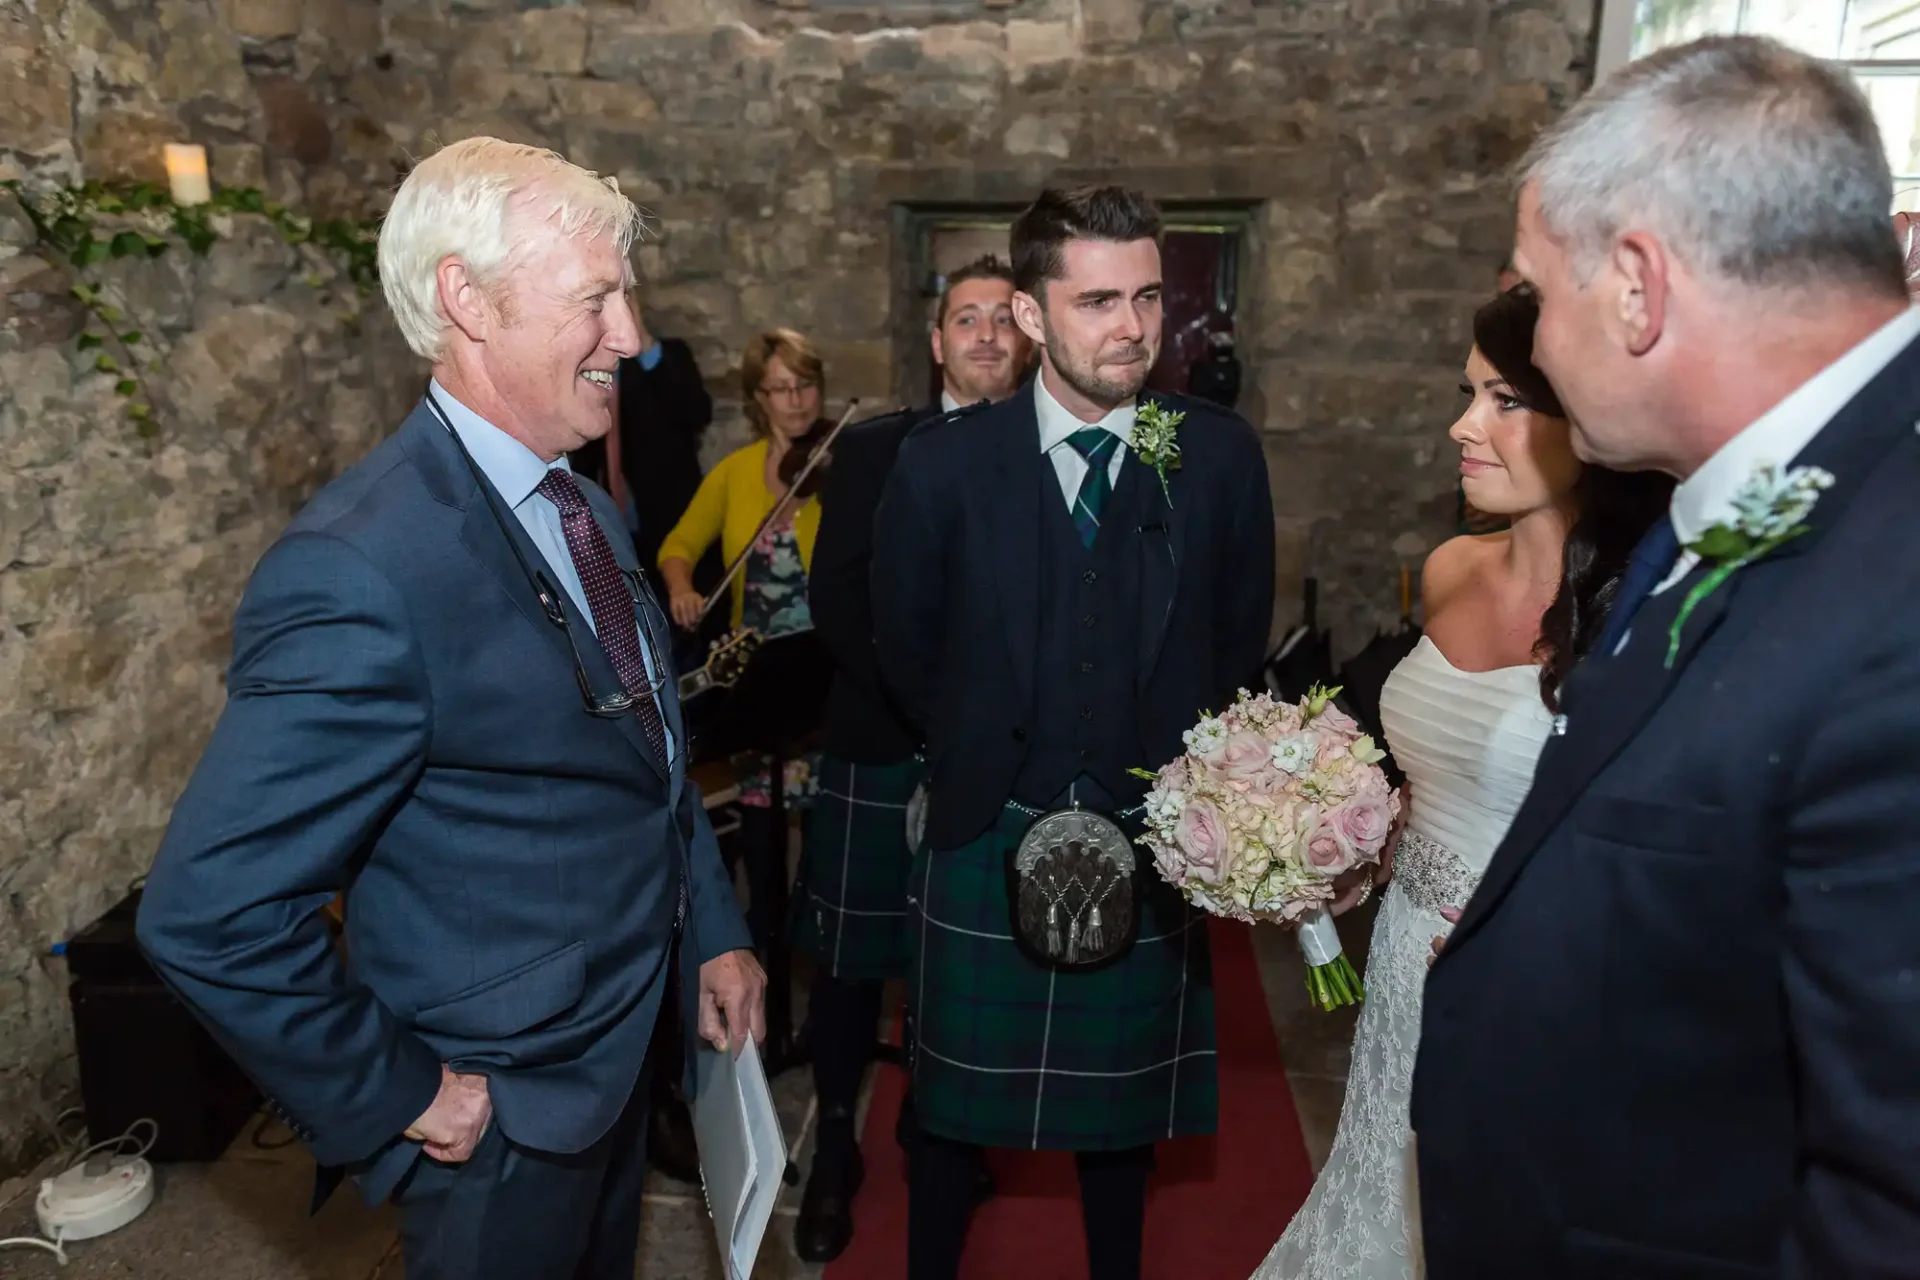 A bride and groom stand during their wedding ceremony while an older man in a suit laughs with them, another guest watches, and a man in a kilt holds the bride's bouquet.